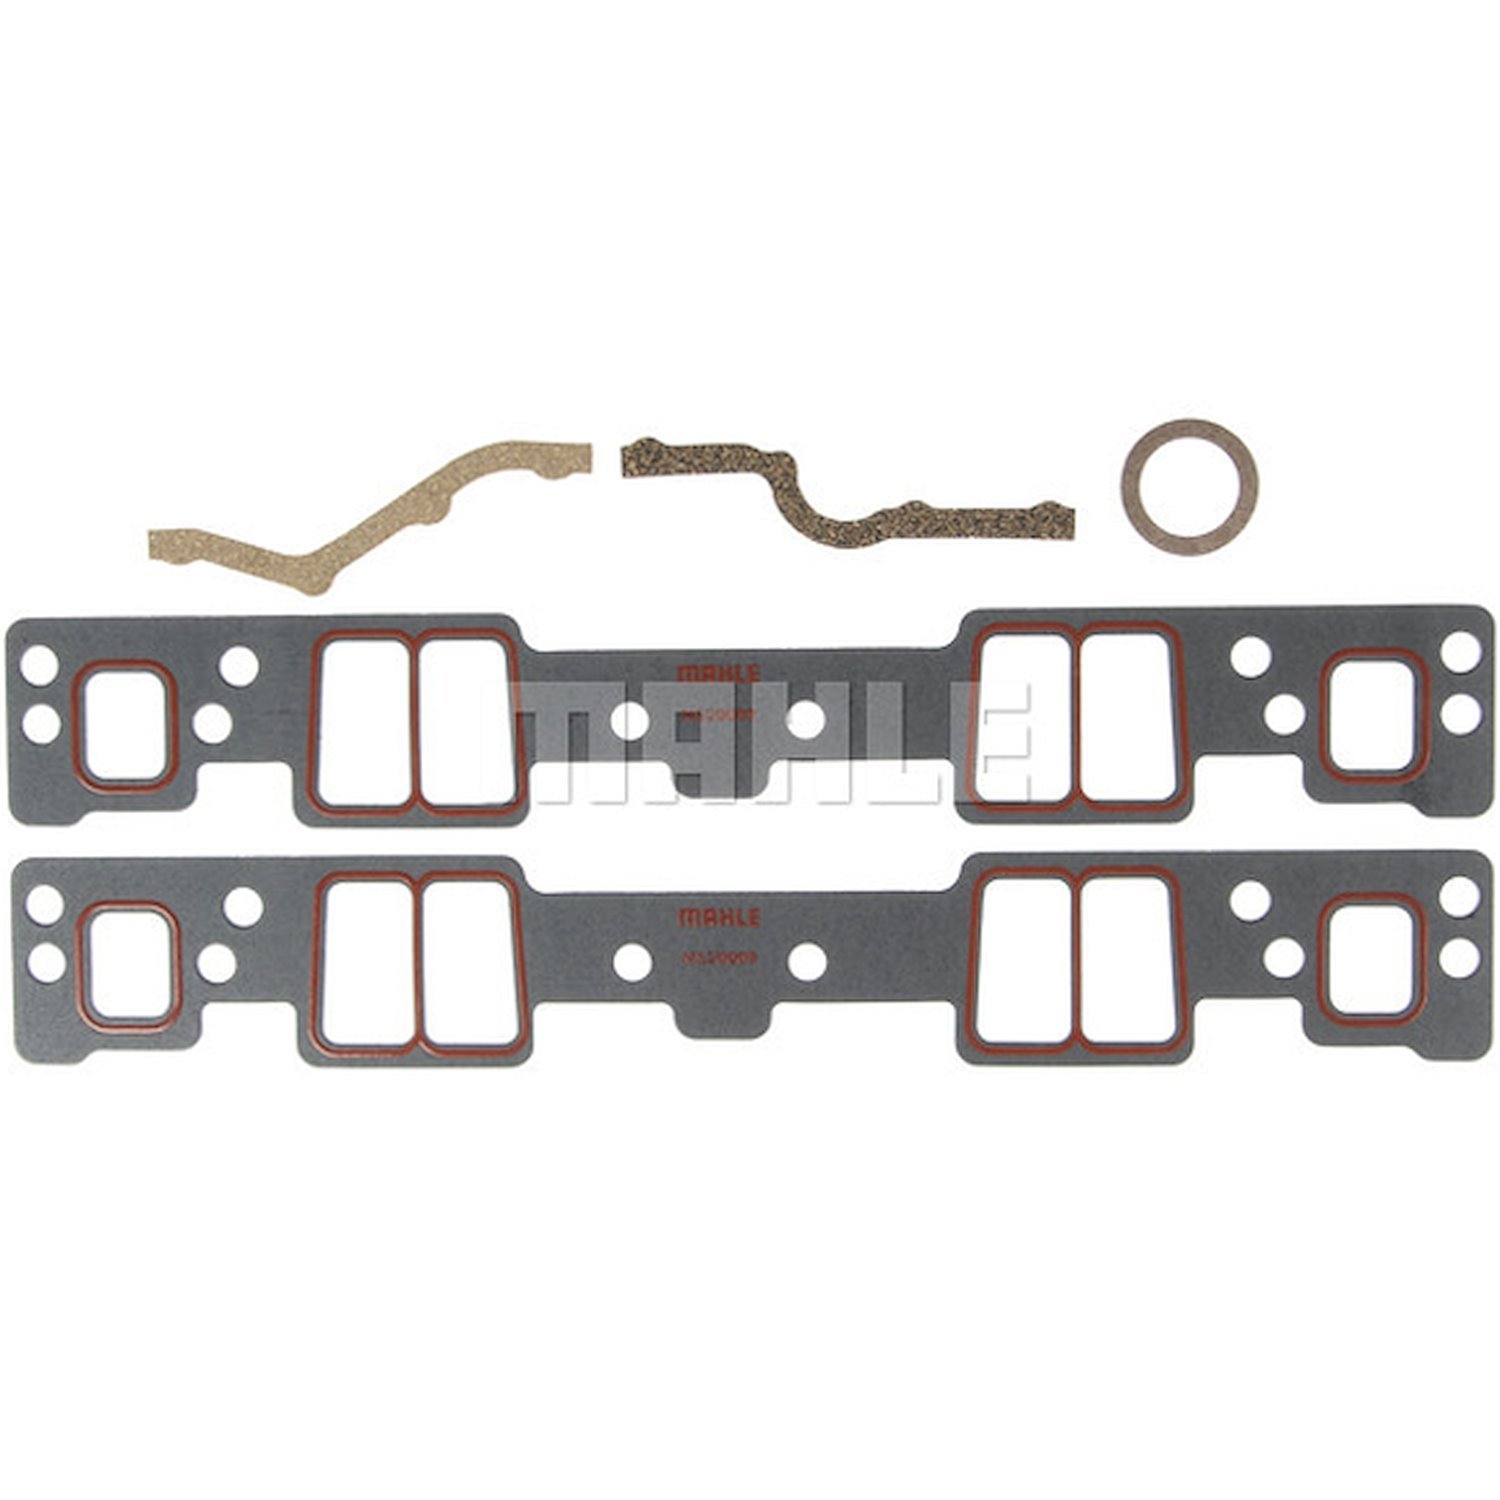 Intake Manifold Gasket Set for Small Block Chevy Vortec